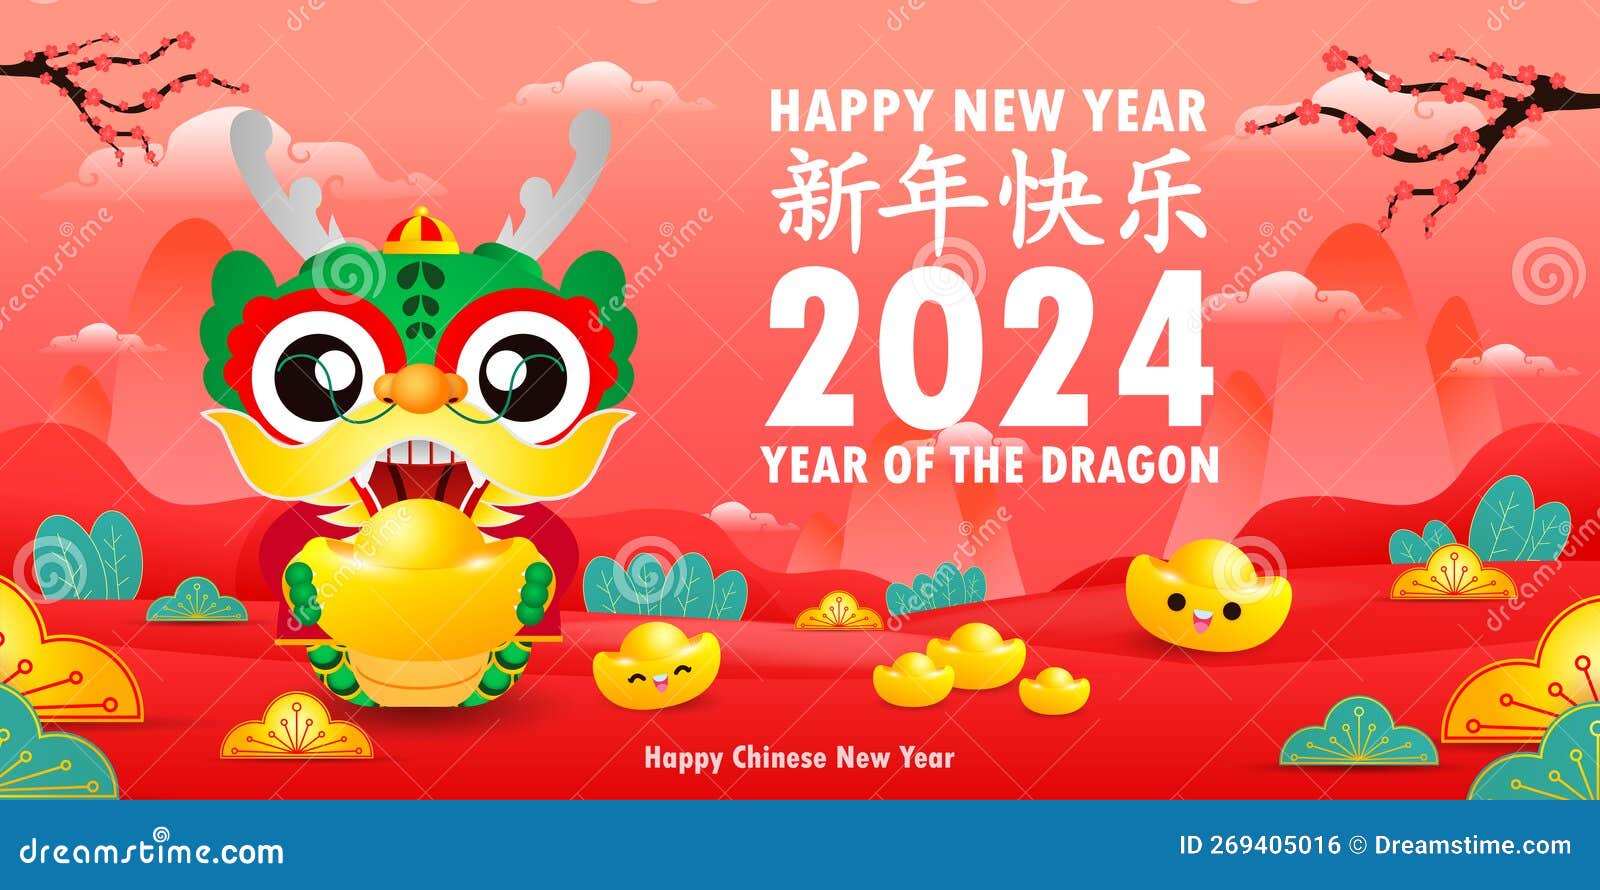 Happy Chinese New Year 2024 with Cute Little Dragon Holding Golden